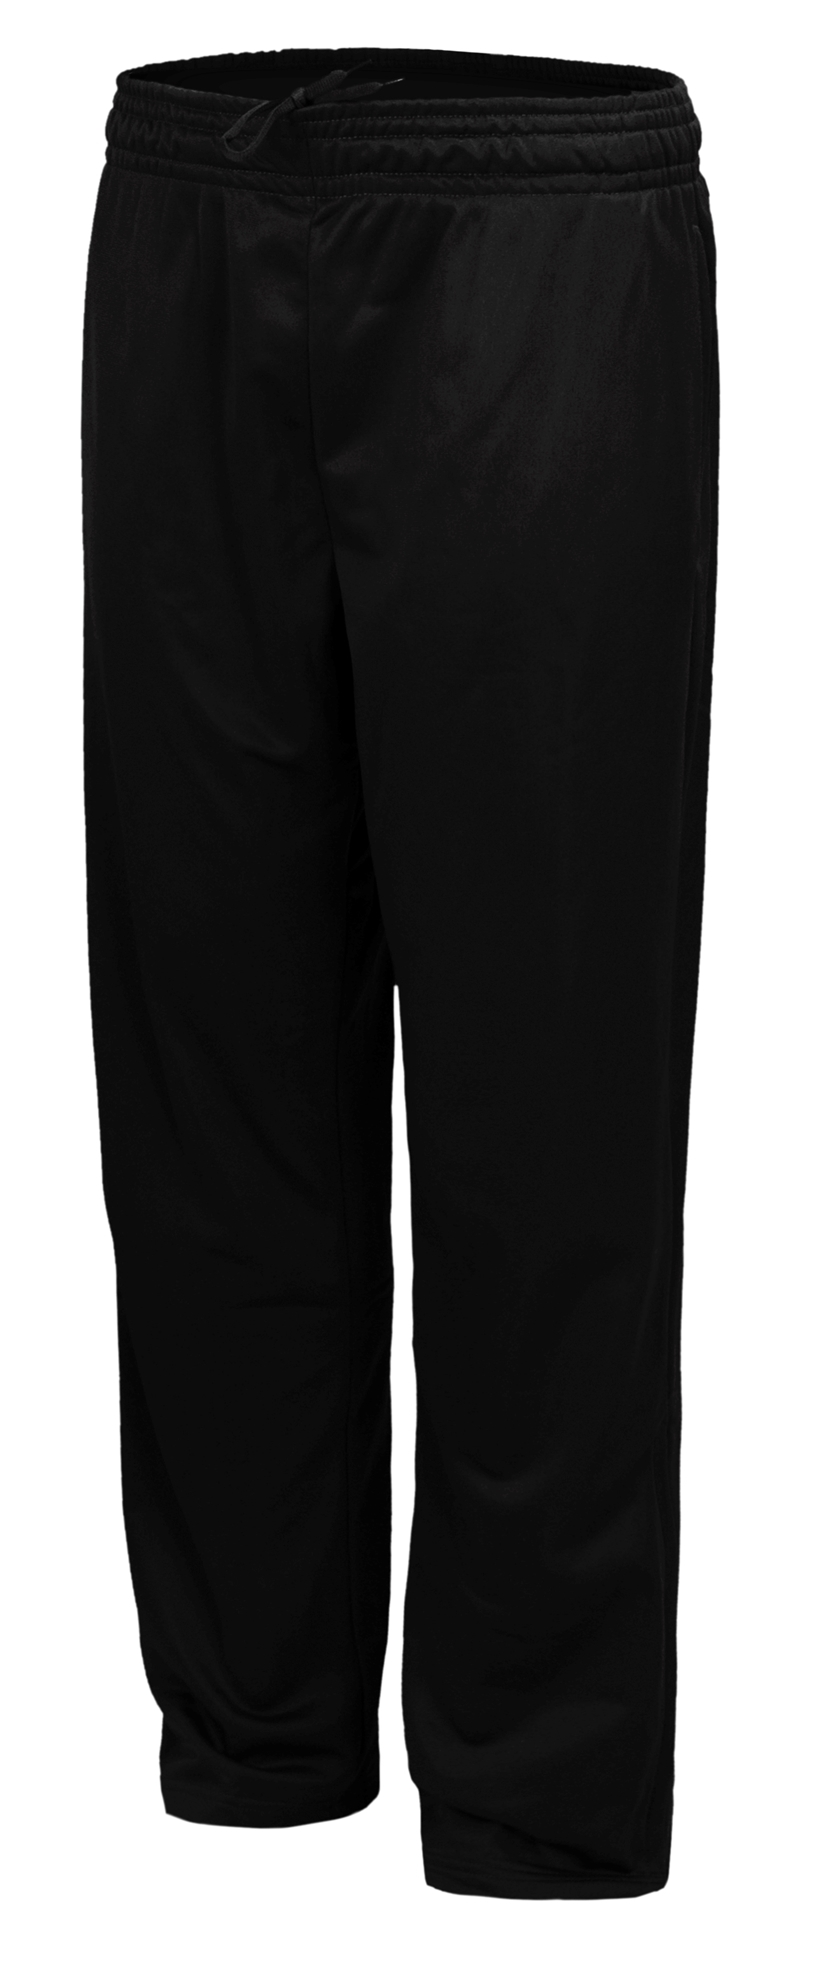 BAW Athletic Wear EF111Y - Youth The Elements Fleece Pant